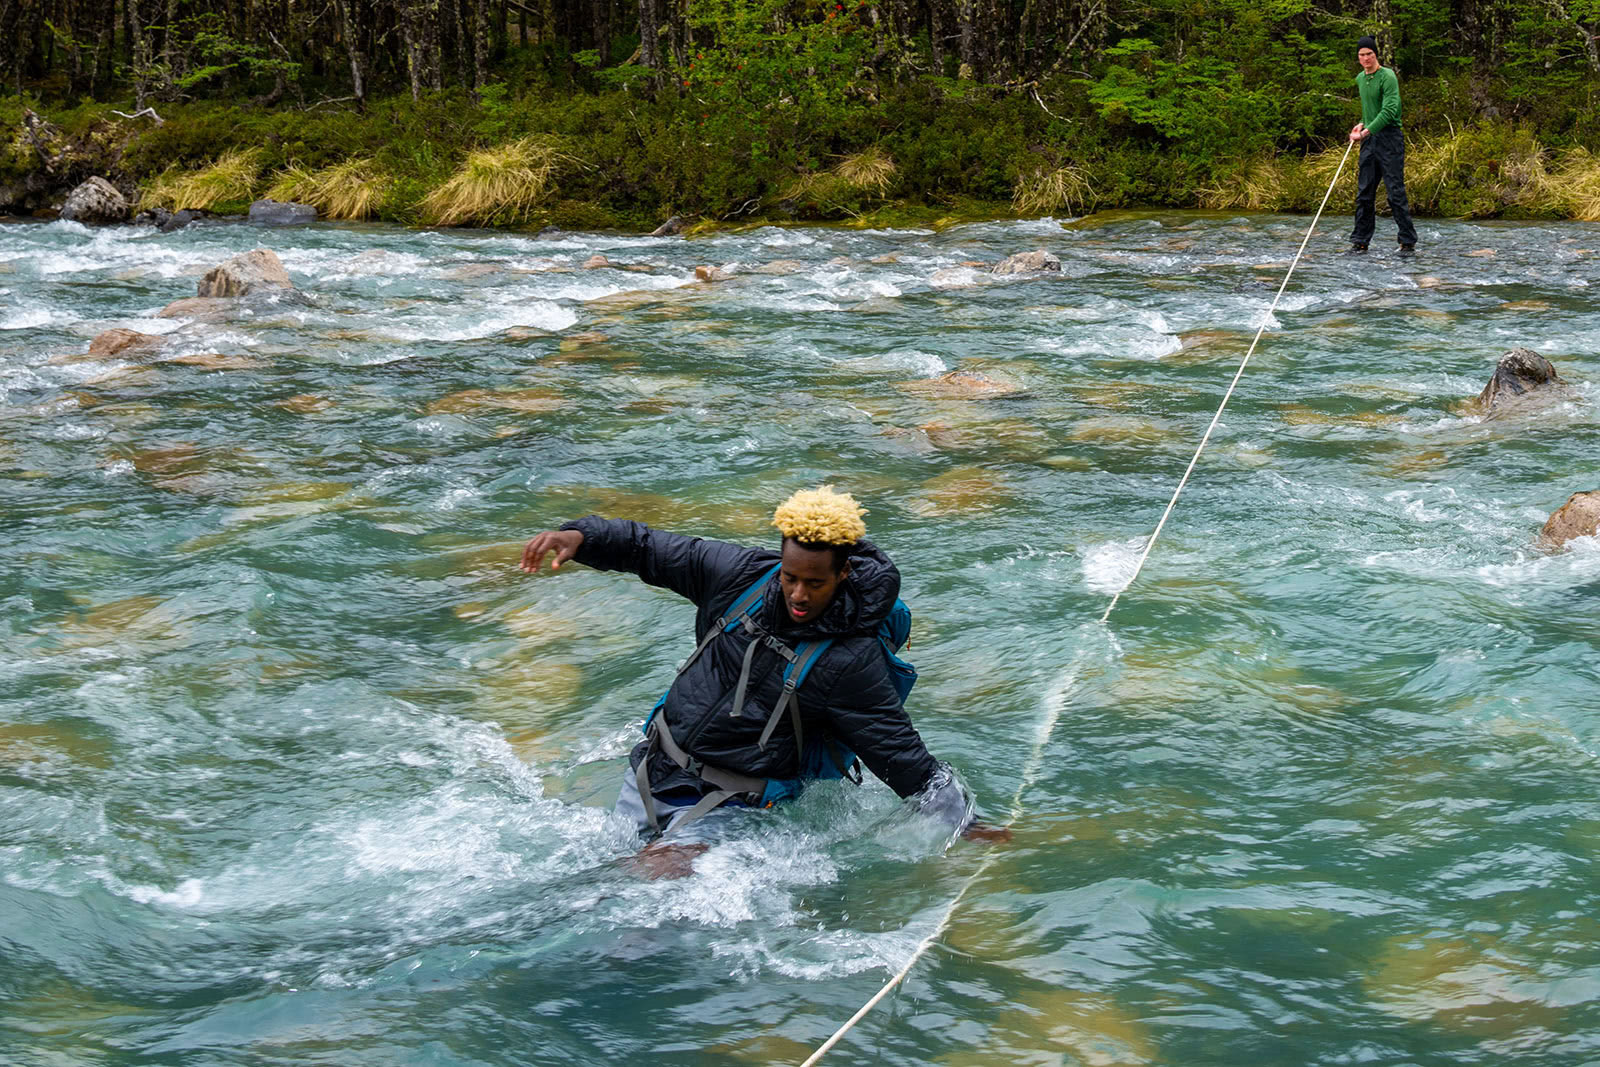 A young man crosses a rapid river in Patagonia, Chile.